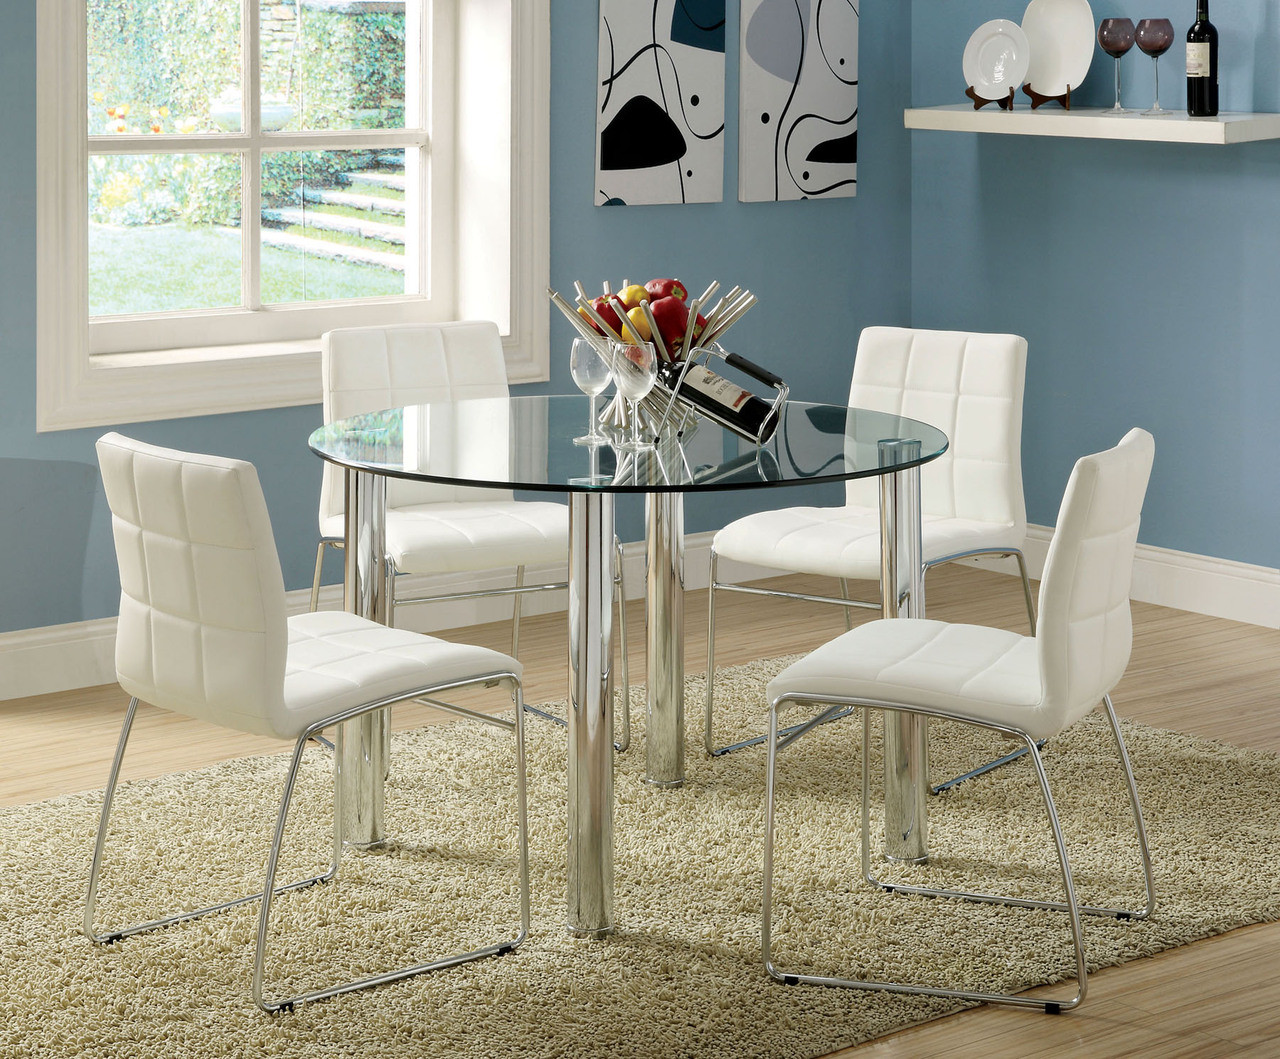 Adalia Round Glass Chrome Dining Table Set | 45" Round Glass Table